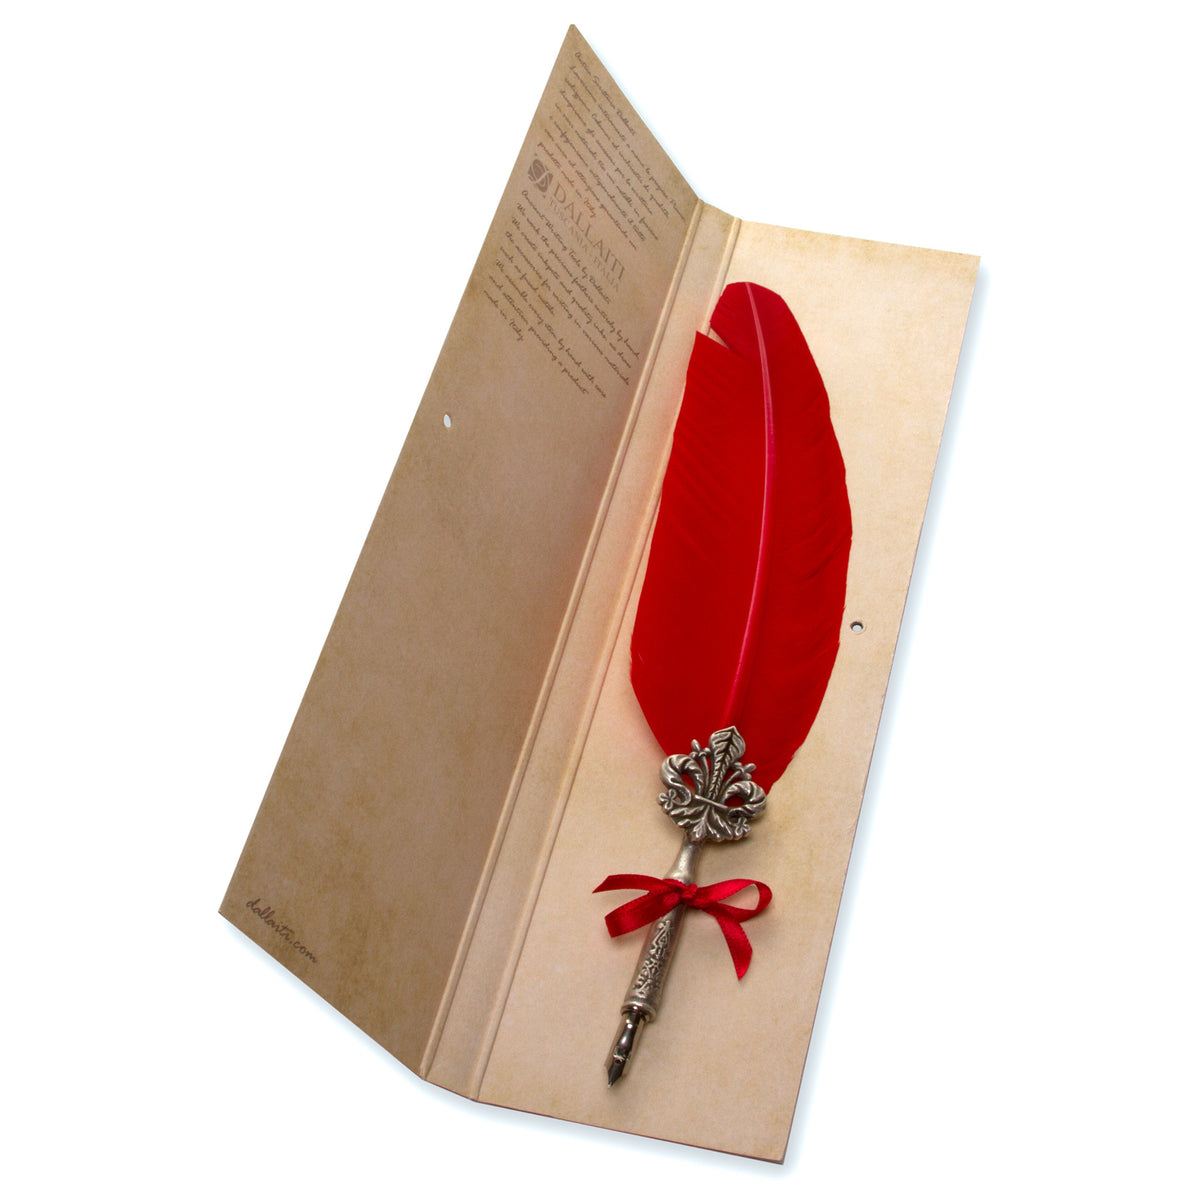 Fleur-de-lys Feather Calligraphy Pen - Red | Getty Store